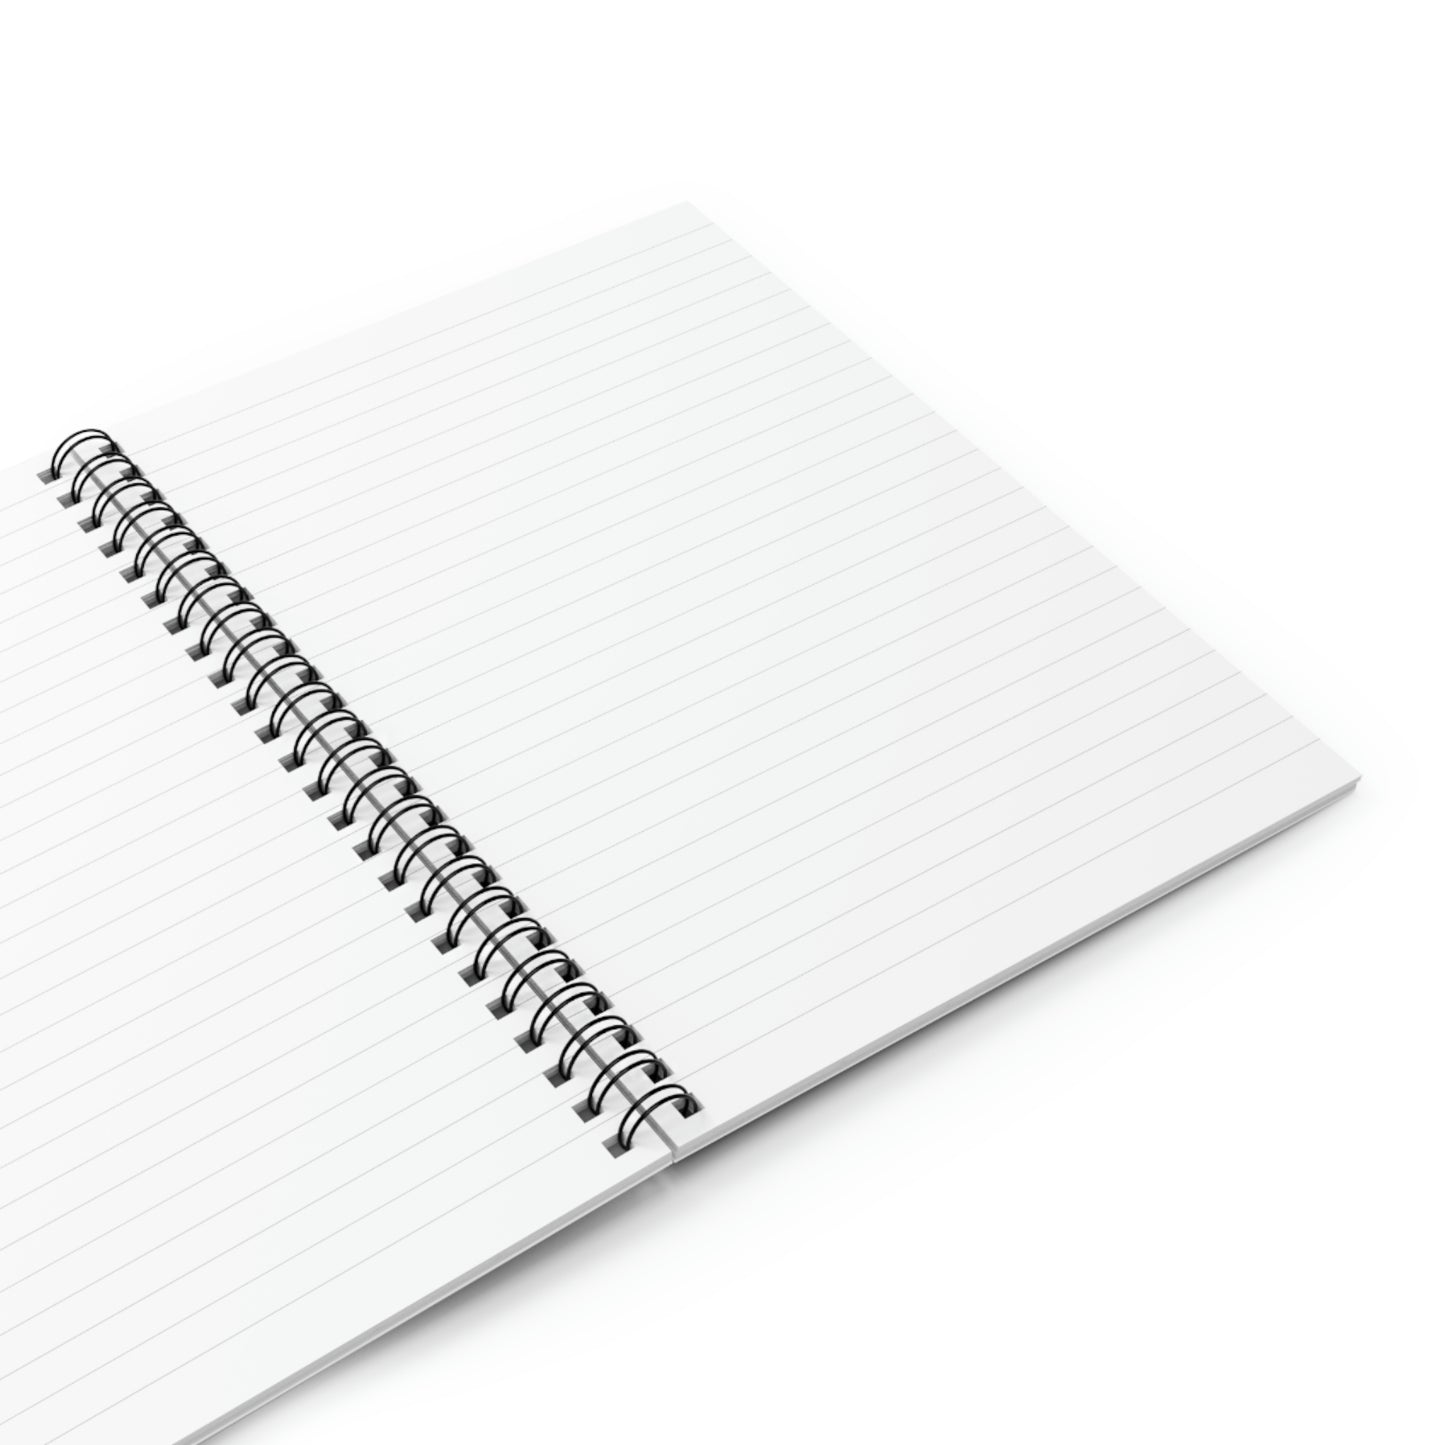 A Second Chance To Get It Right - Spiral Notebook